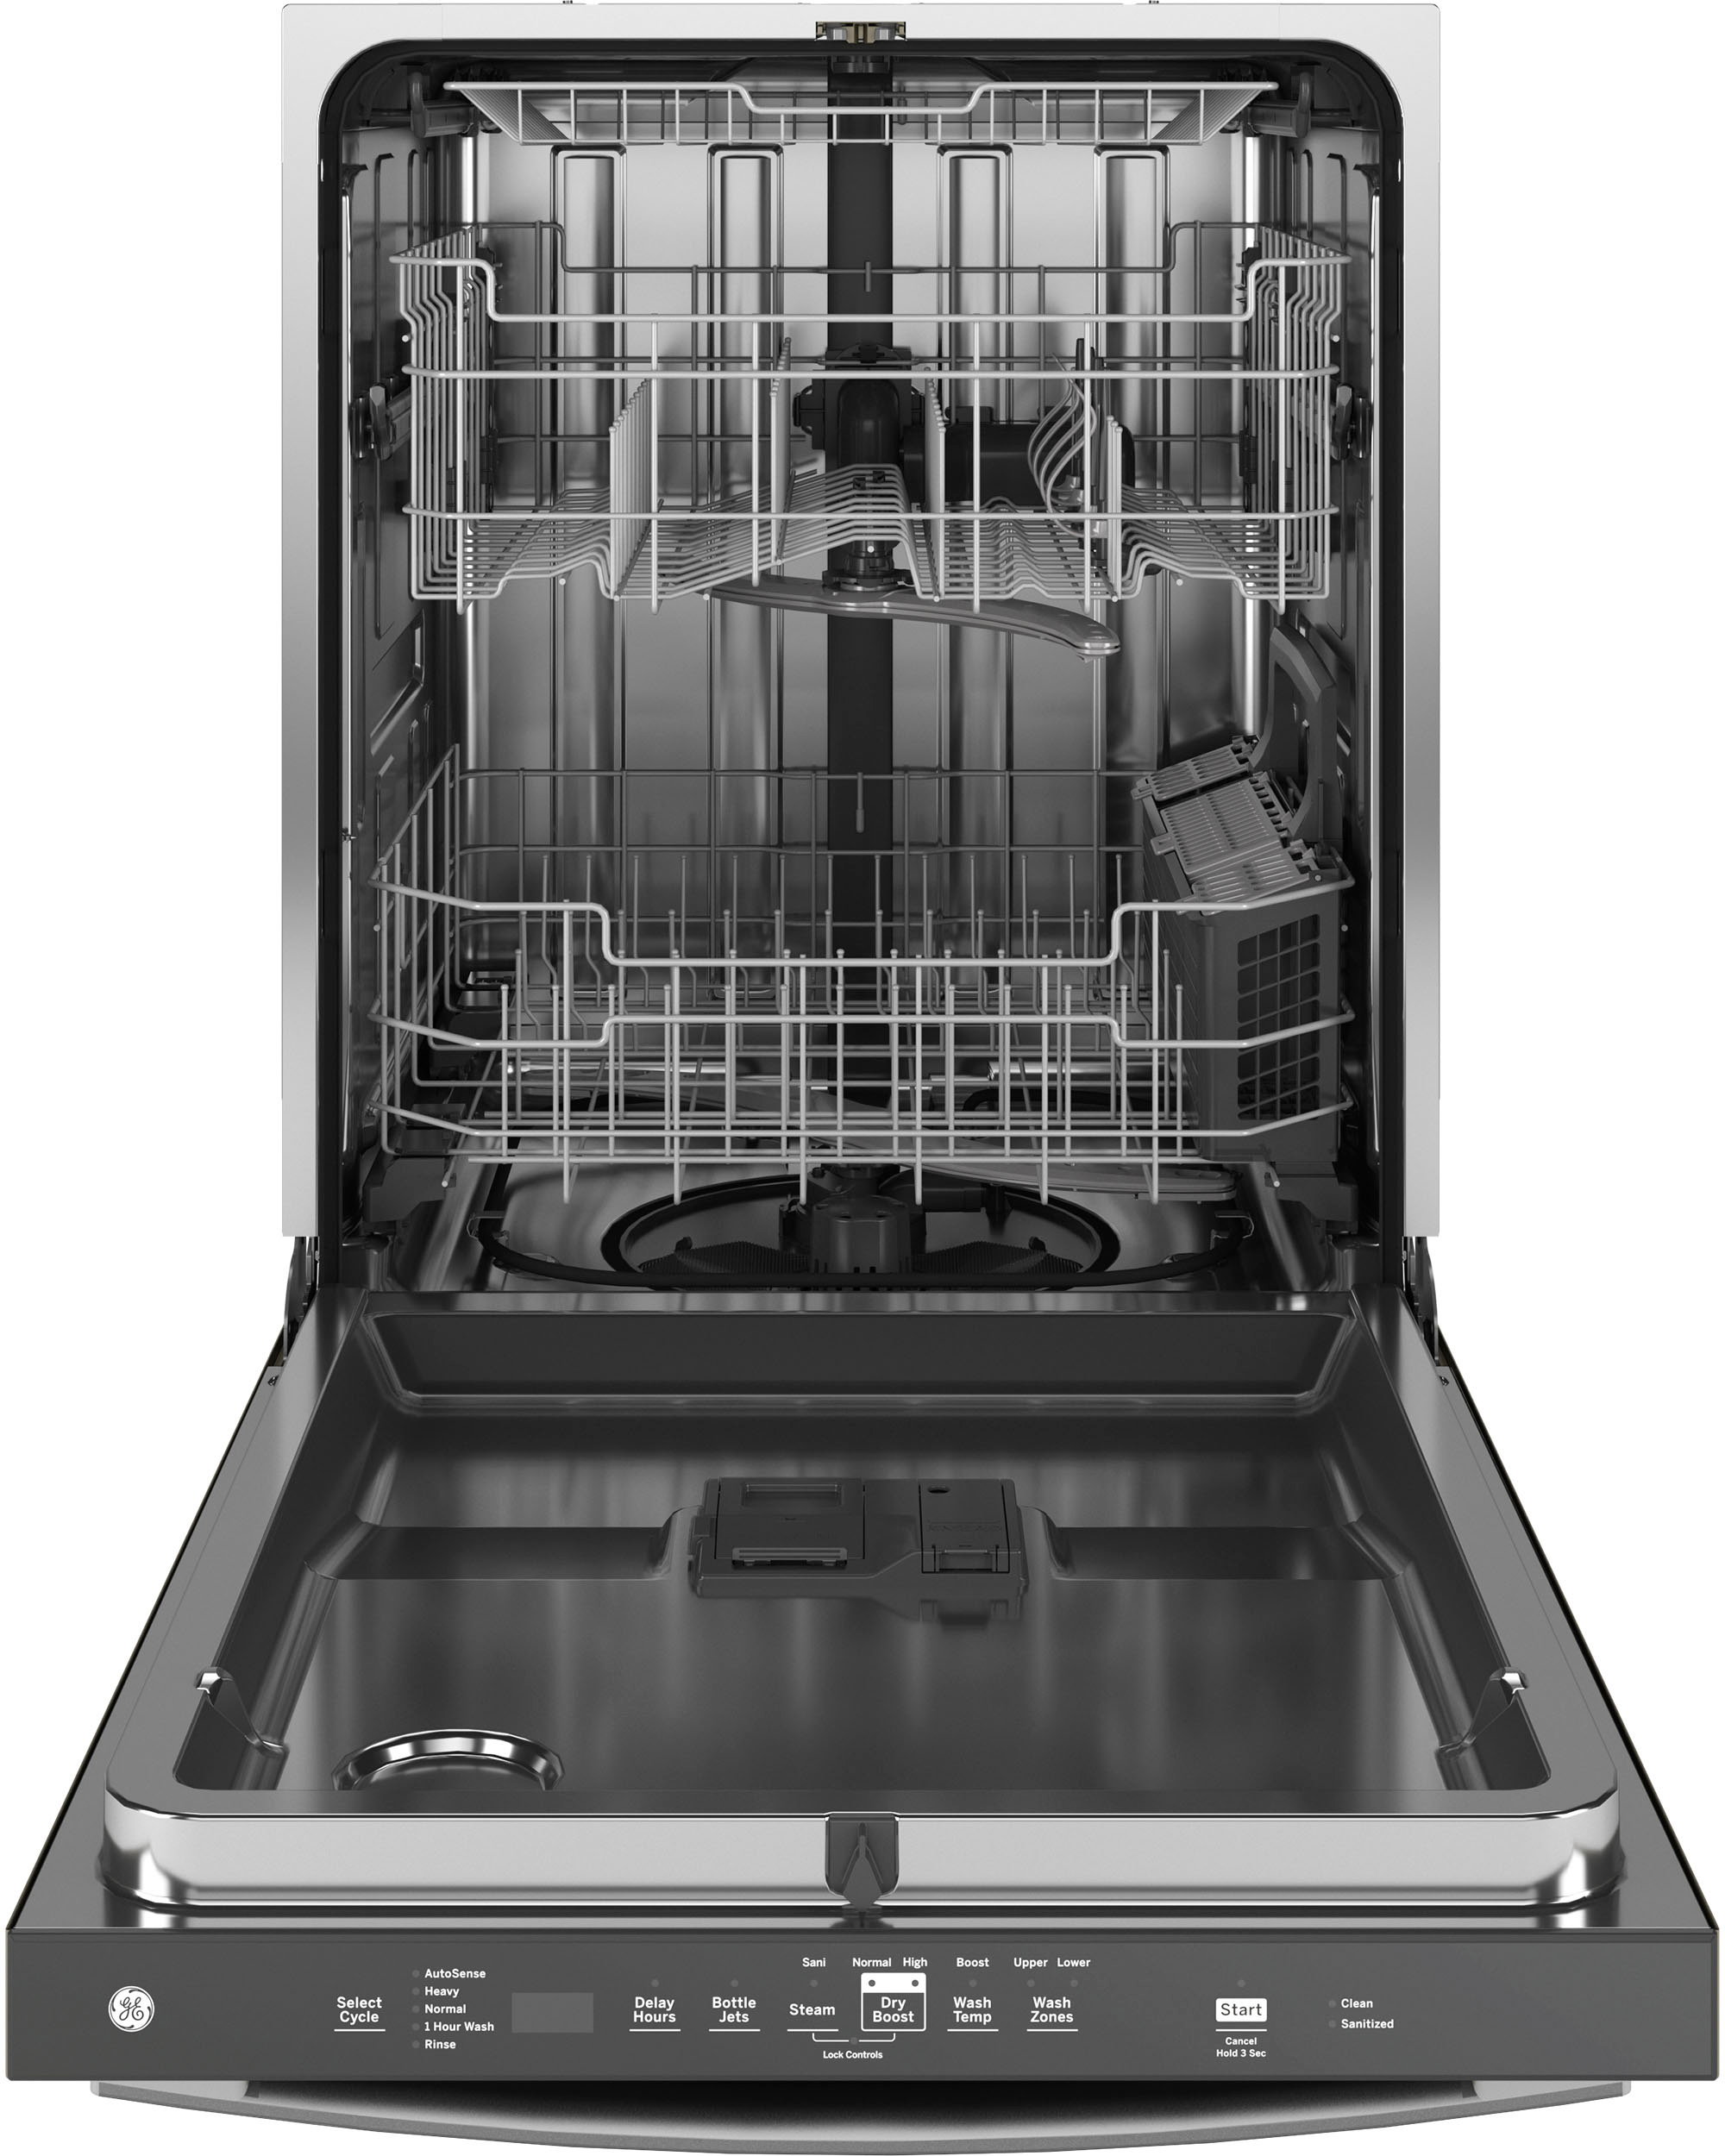 Angle View: GE - 24"Top Control Fingerprint Resistant Dishwasher with Stainless Steel Interior Dishwasher with Sanitize Cycle - Stainless Steel